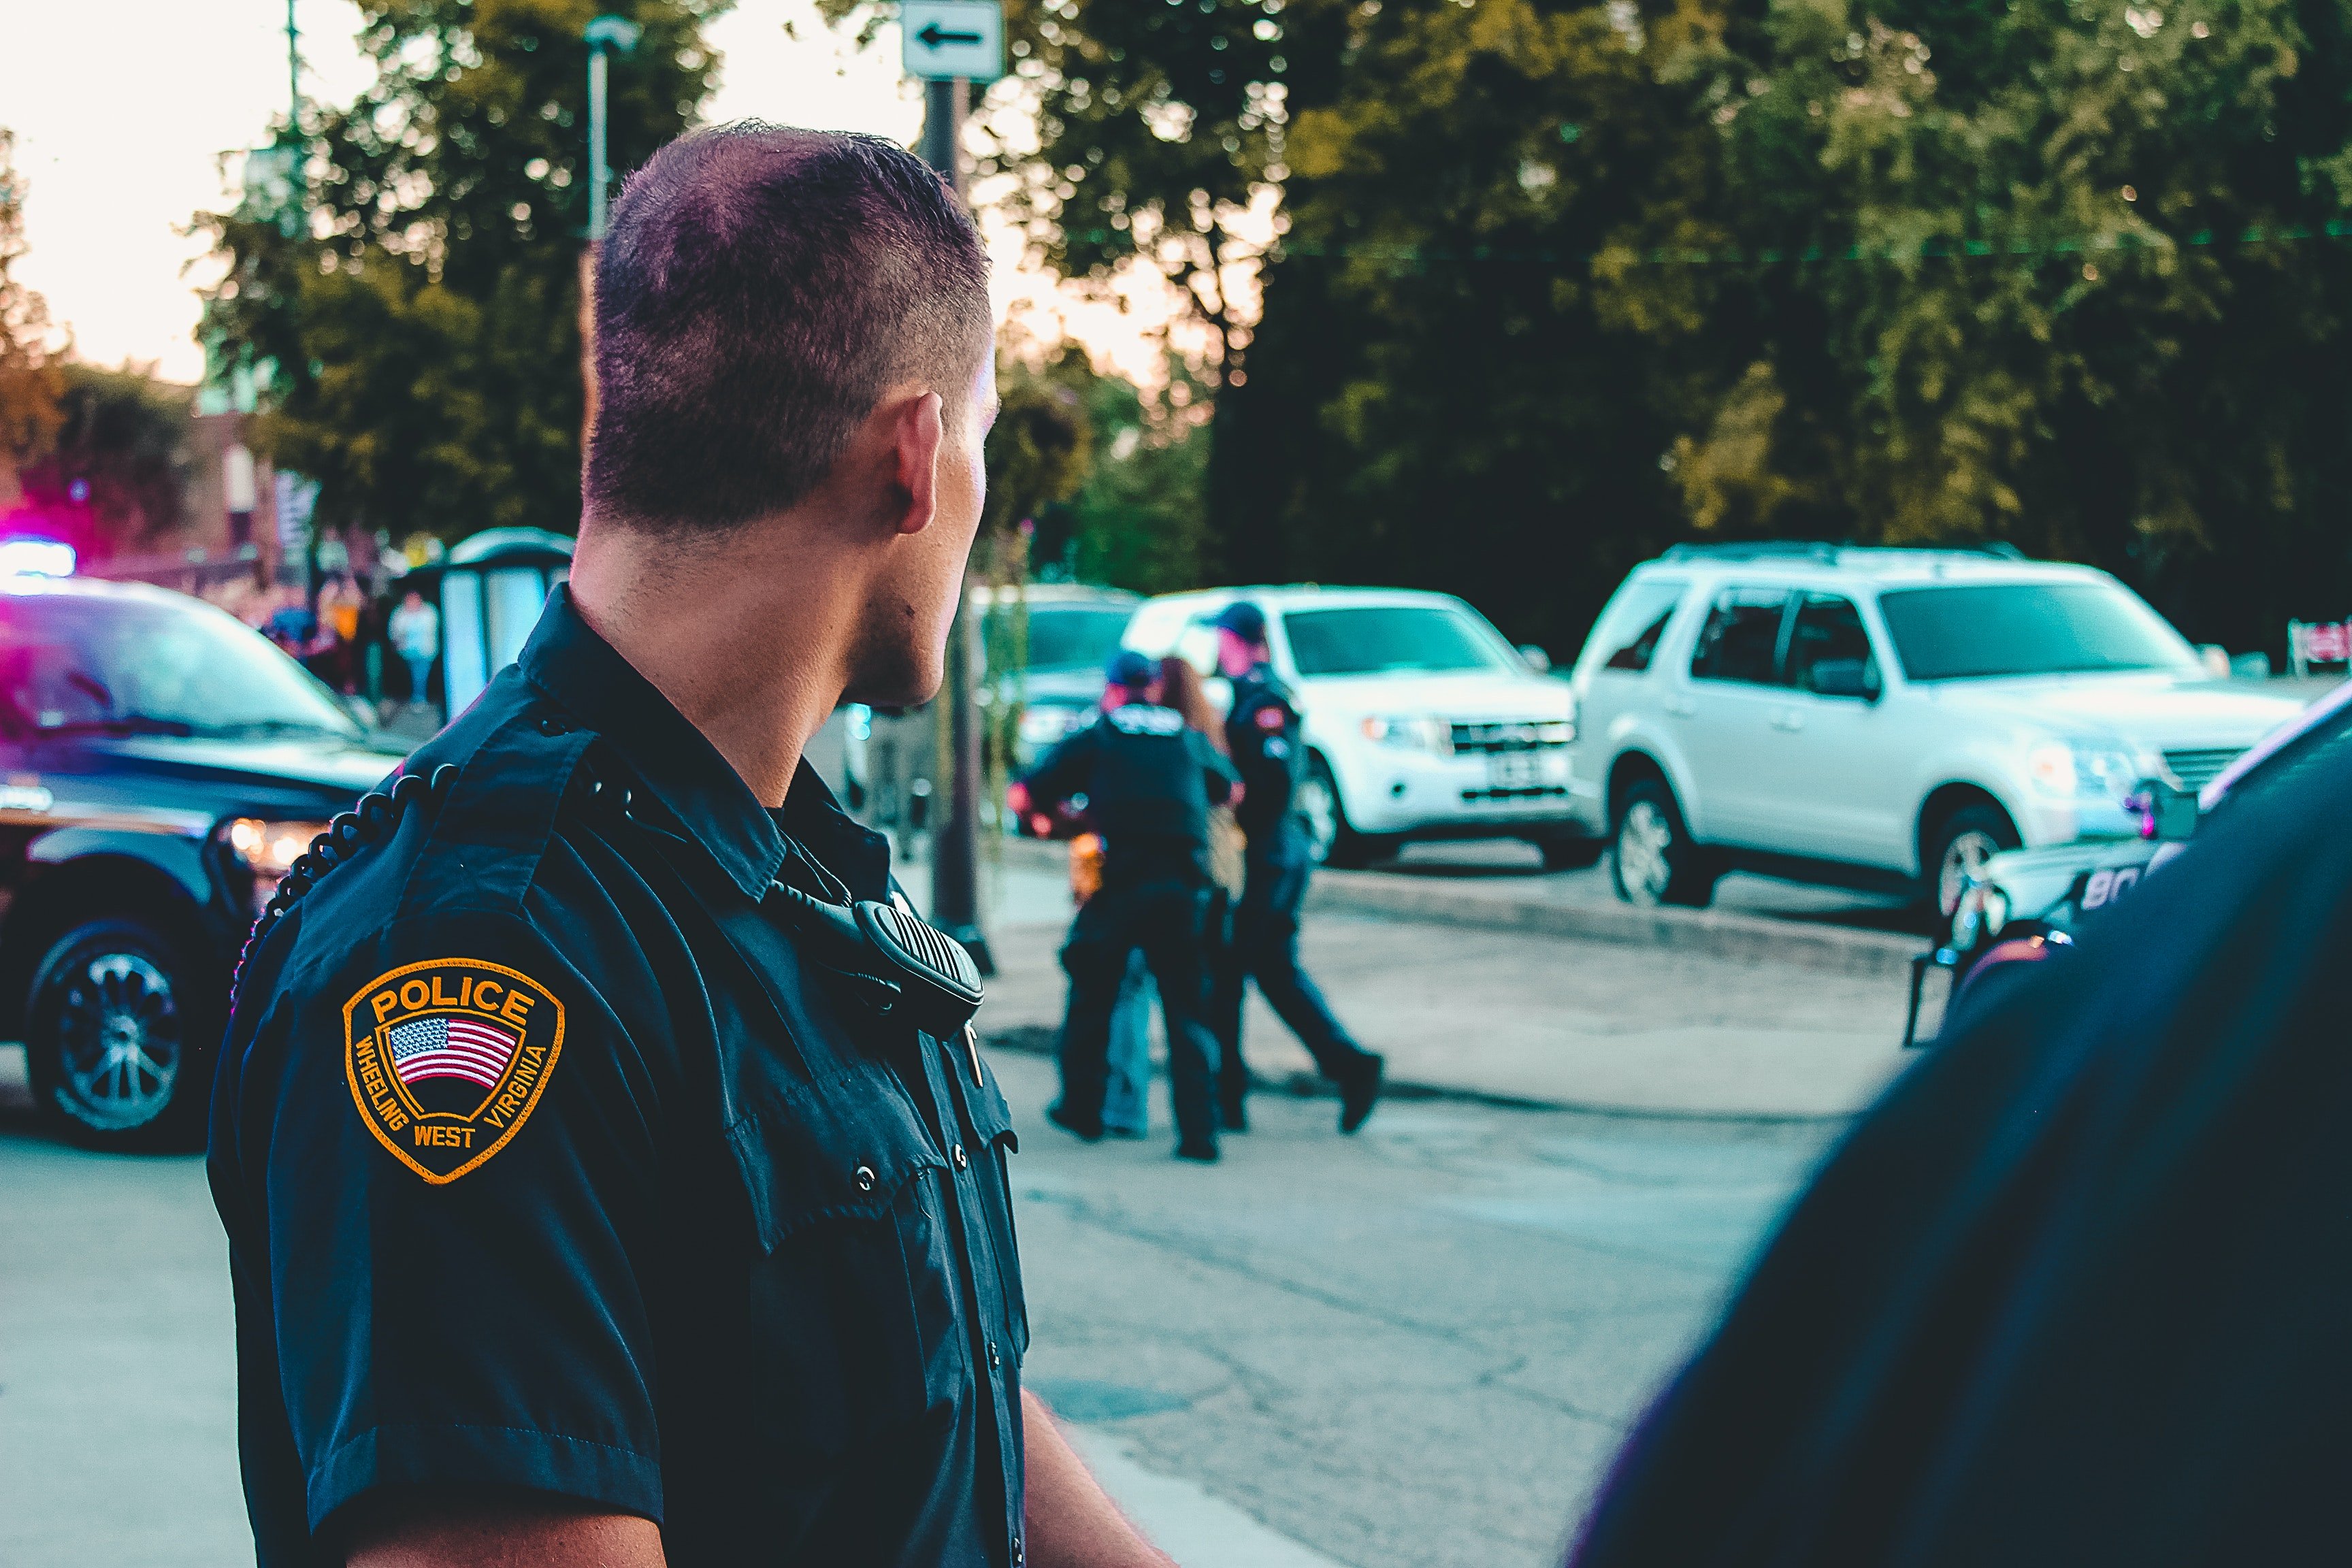 A policeman looks on as a man is arrested | Source: Pexels